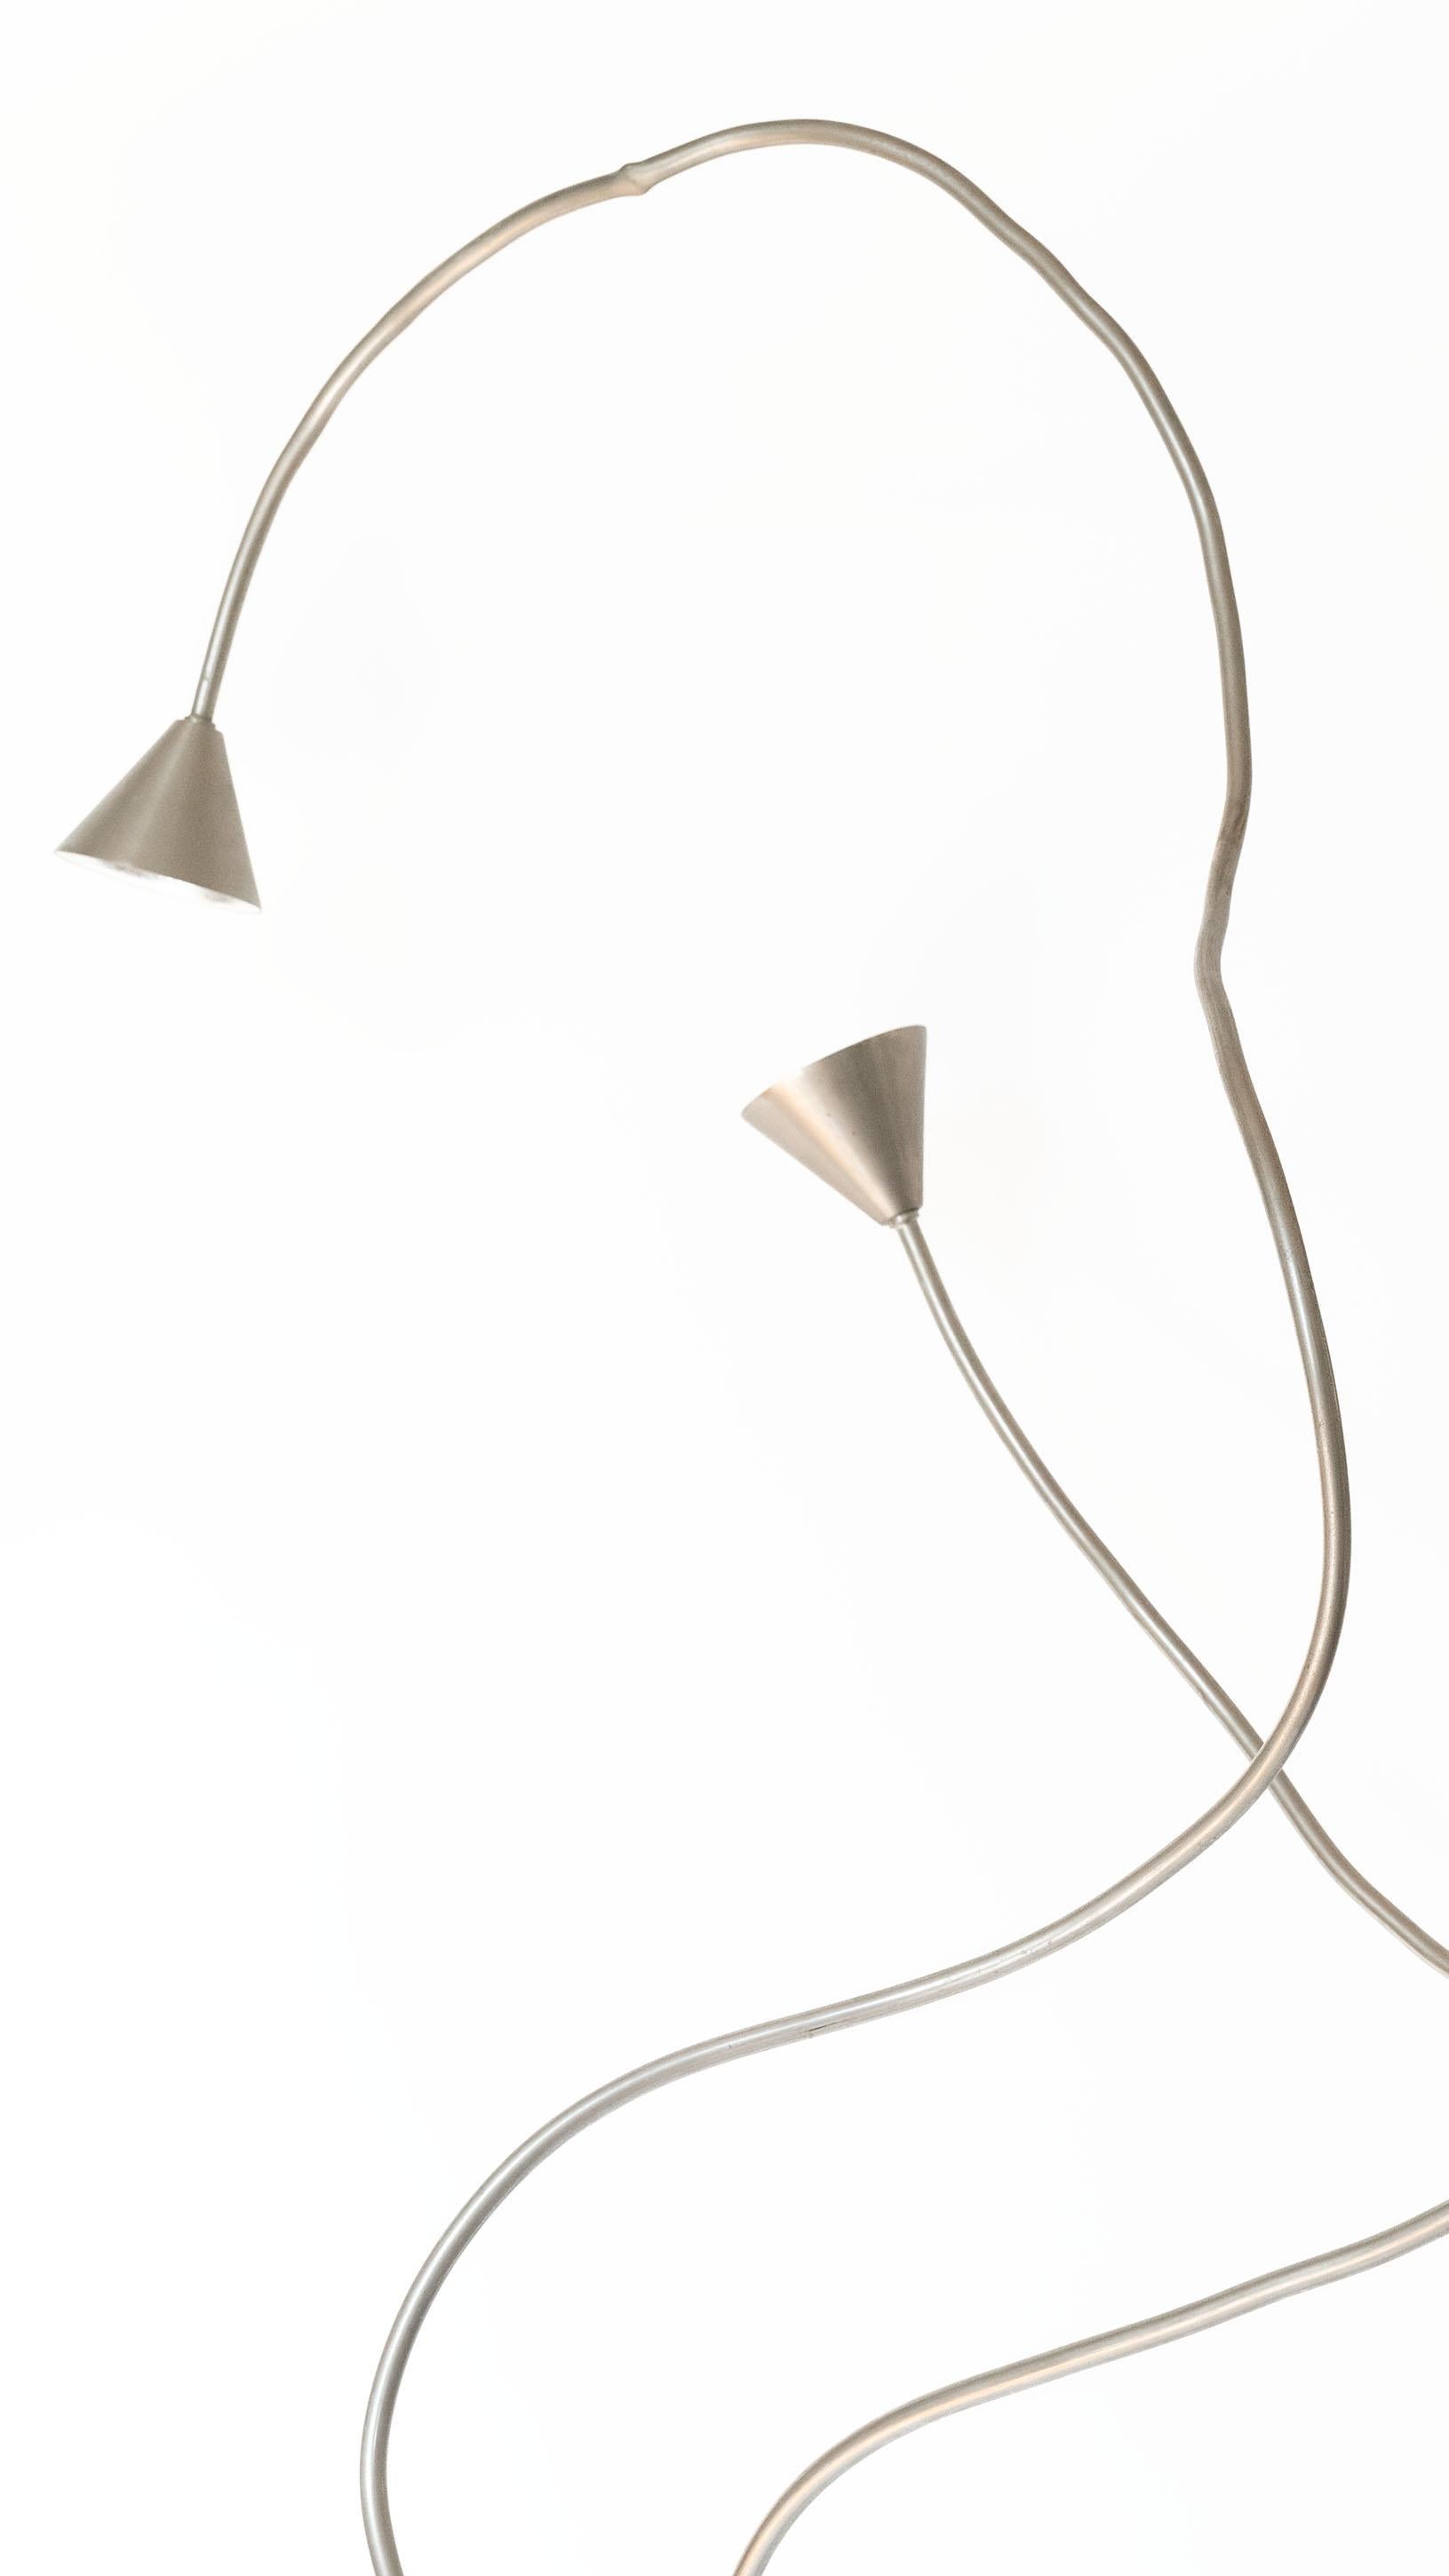 PAPIRO LAMPSSERGIO CALATRONI FOR PALLUCCO C.1989An interactive and sculptural design, each lamp can be bent into a variety of shapes and directions. Dimmer allows for the bulb to emit a soft light or a strong glow depending on the mood. 

color: